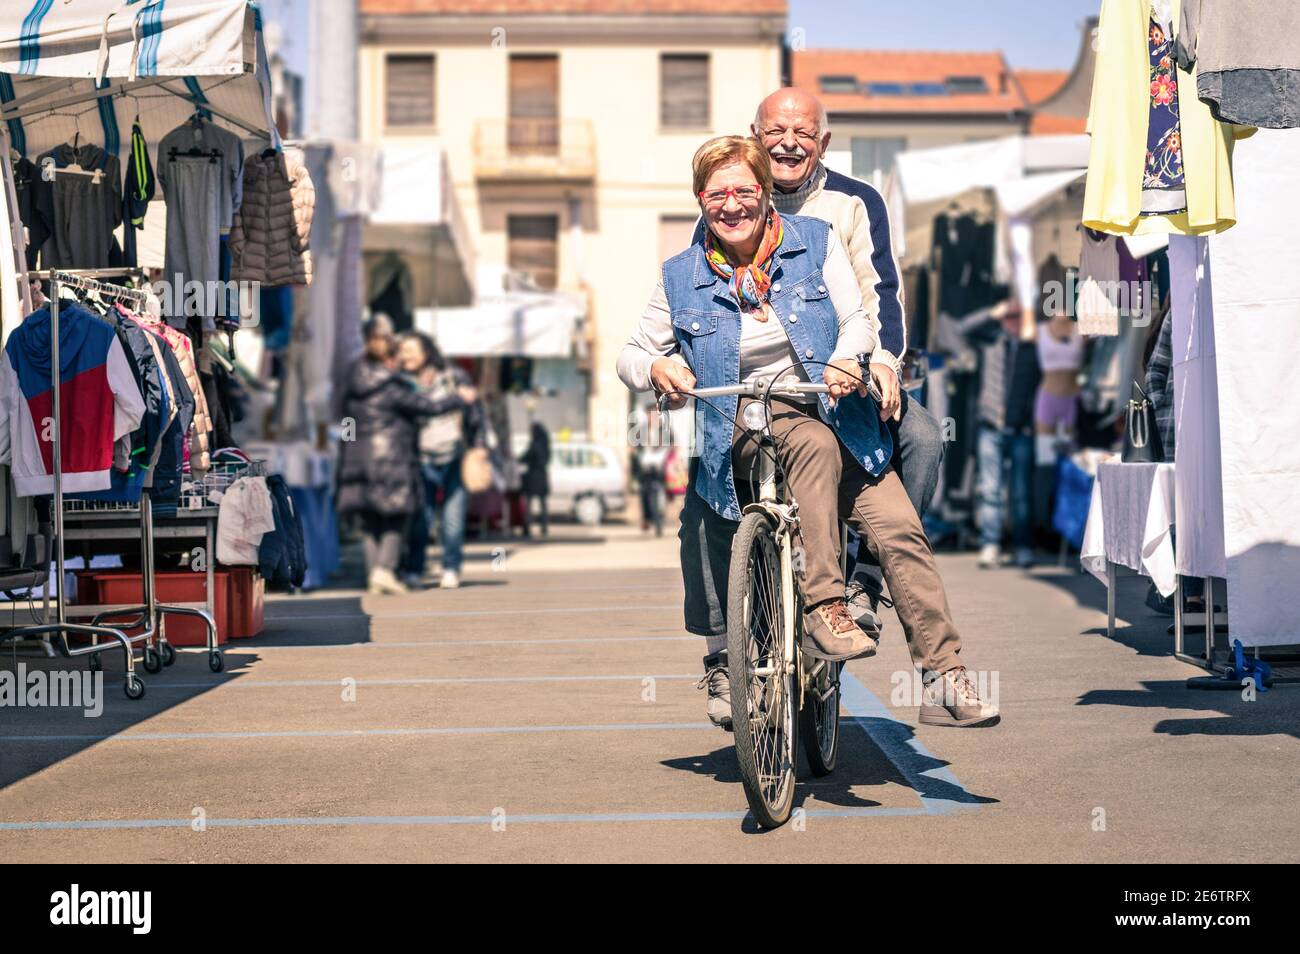 Happy senior couple having fun with bicycle at flea market - Concept of active playful elderly with bike during retirement - Everyday joy lifestyle Stock Photo